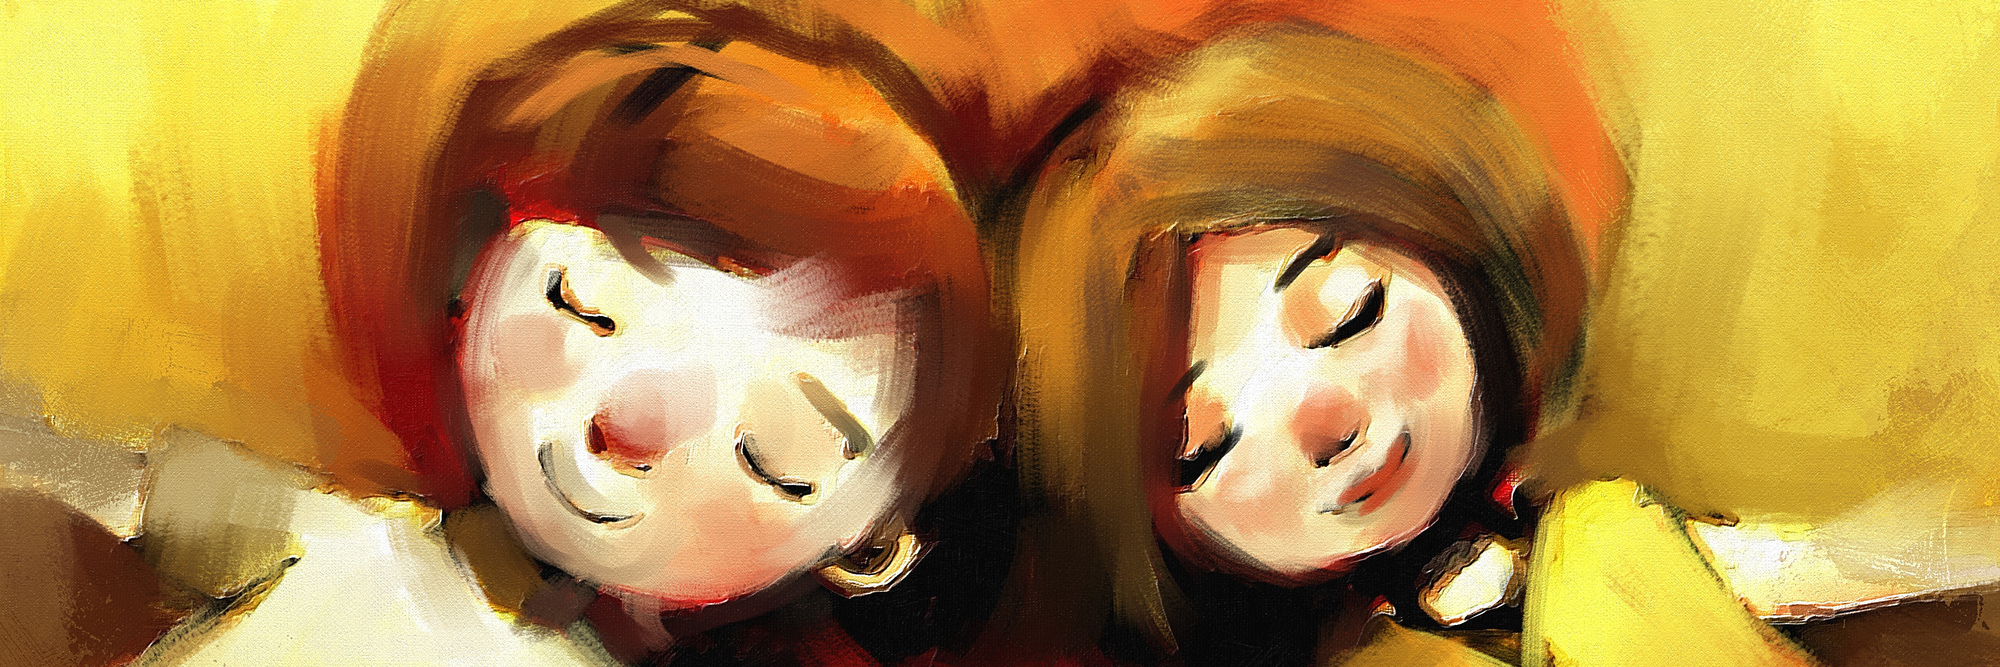 digital painting of young couple sleeping with heart shaped pillow, oil on canvas texture